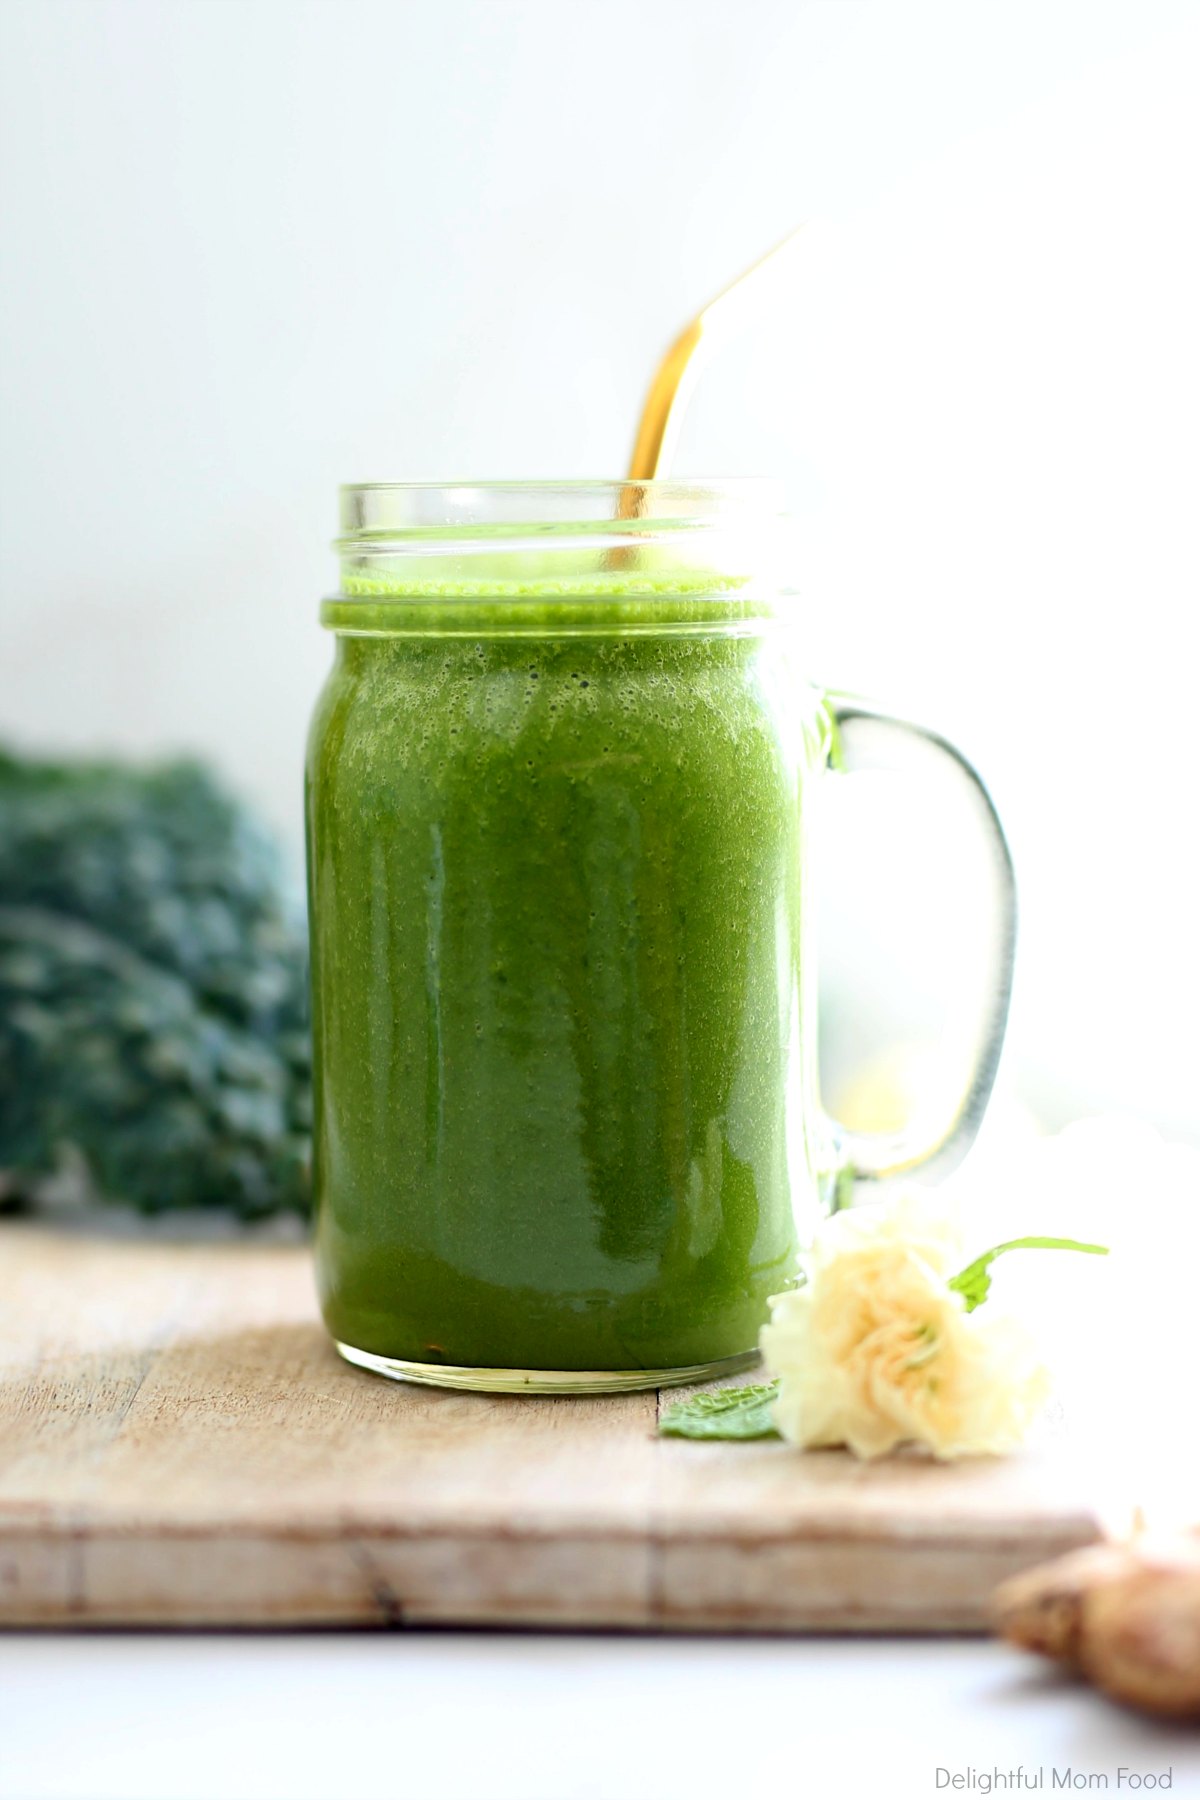 This chlorella detox smoothie is bursting with delicious tropical flavors in a vibrant green color that is packed with superfoods, vitamins, minerals and antioxidants that detoxify the body from the inside out! #chlorella #detoxsmoothie #greensmoothie #vegan #detoxrecipe #smoothie #bestchlorella #chlorellasmoothie #breakfast #snack | Recipe at Delightful Mom Food